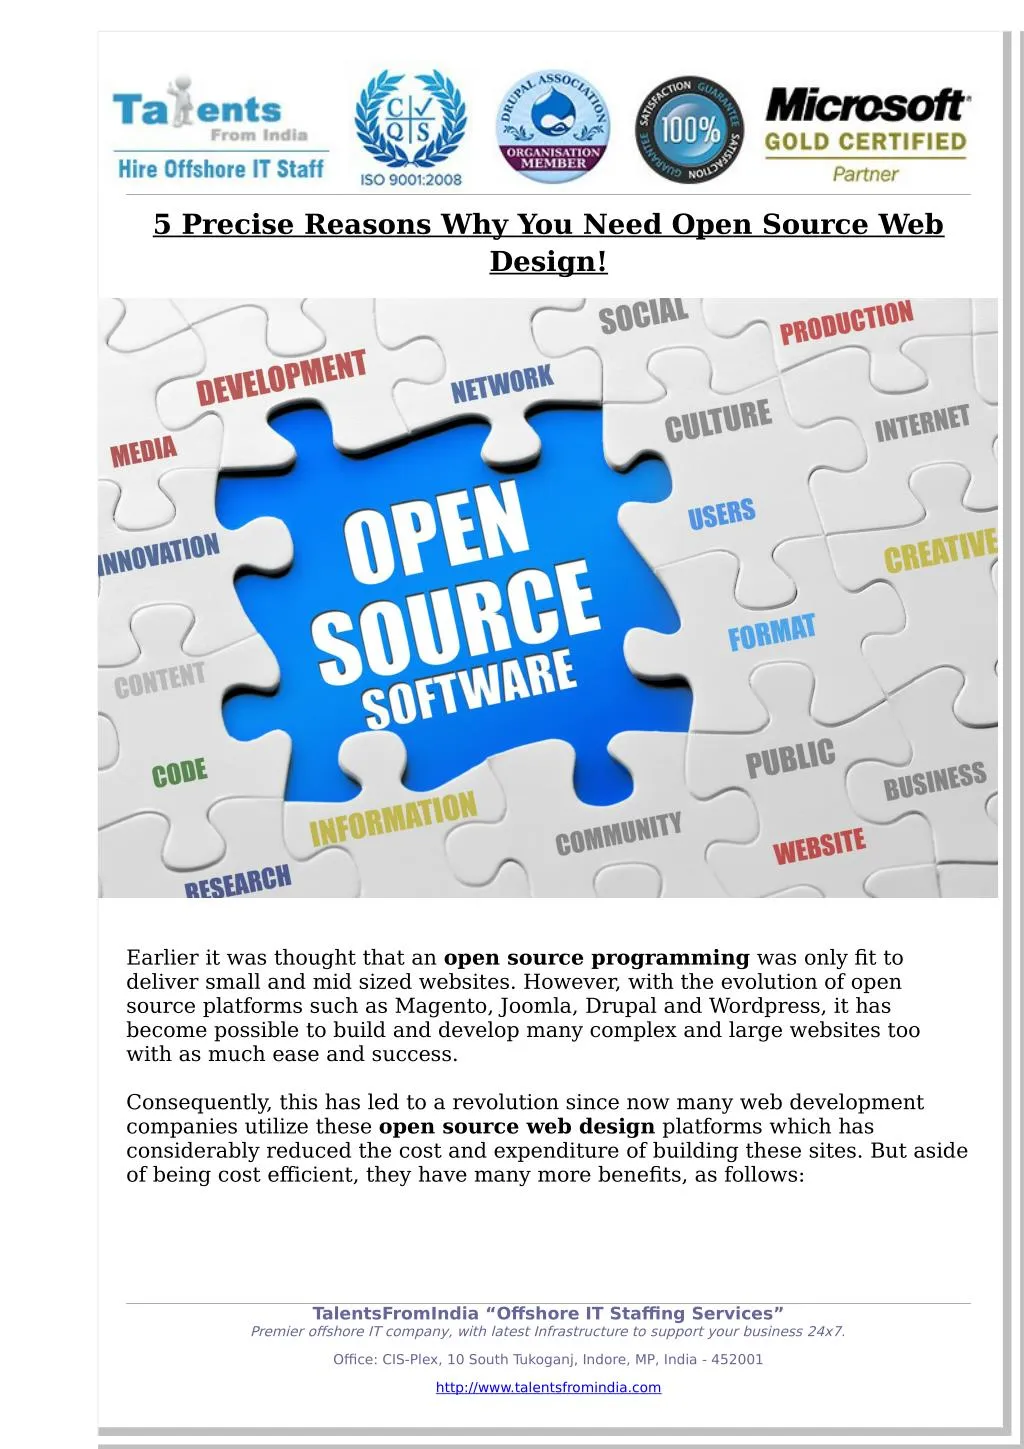 5 precise reasons why you need open source